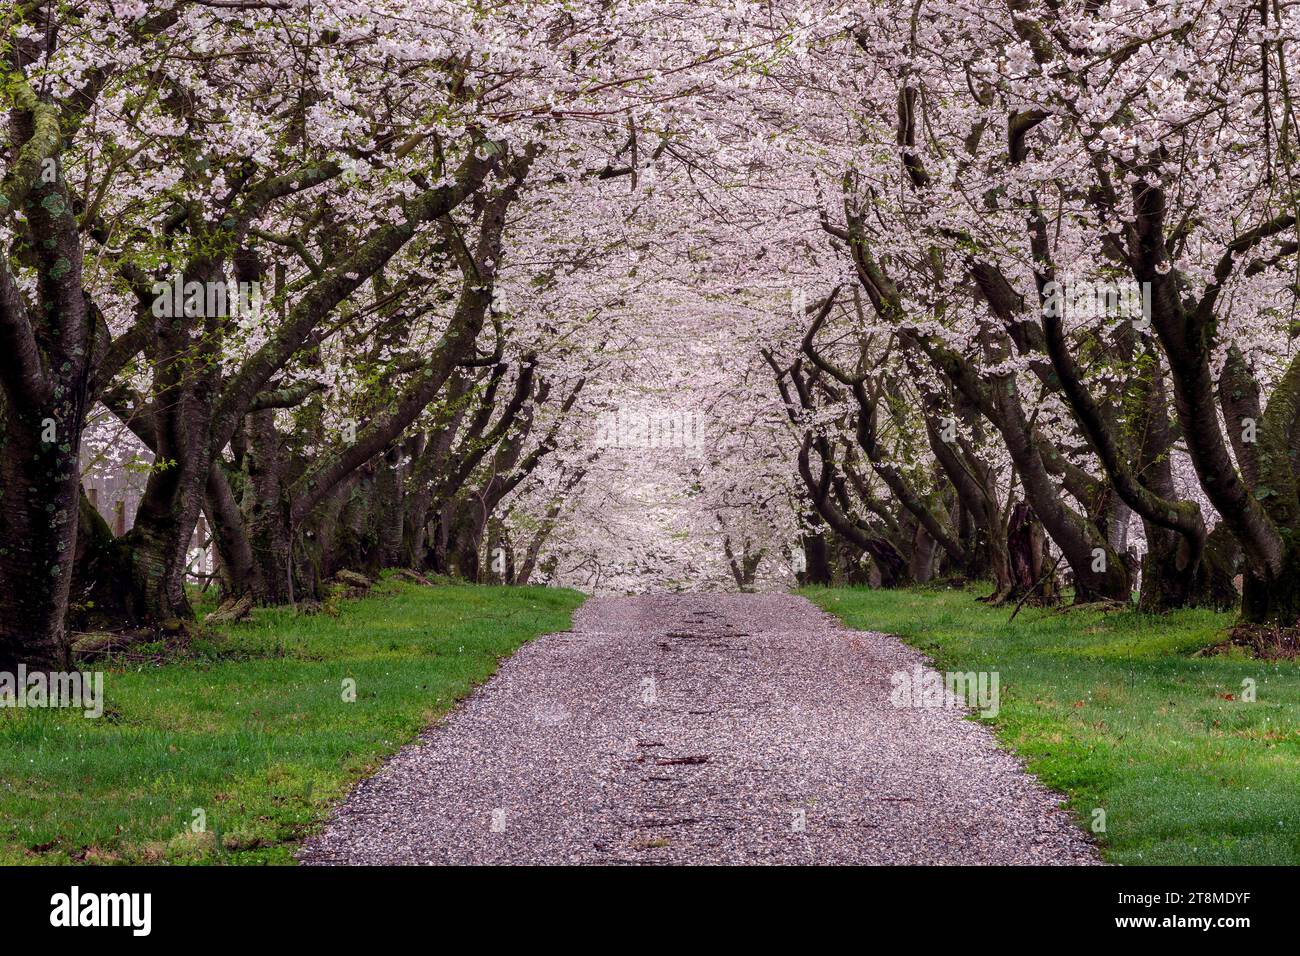 A narrow, enchanted lane, covered in fallen cherry blossoms, stretches out under a canopy of pink blossoms. Stock Photo